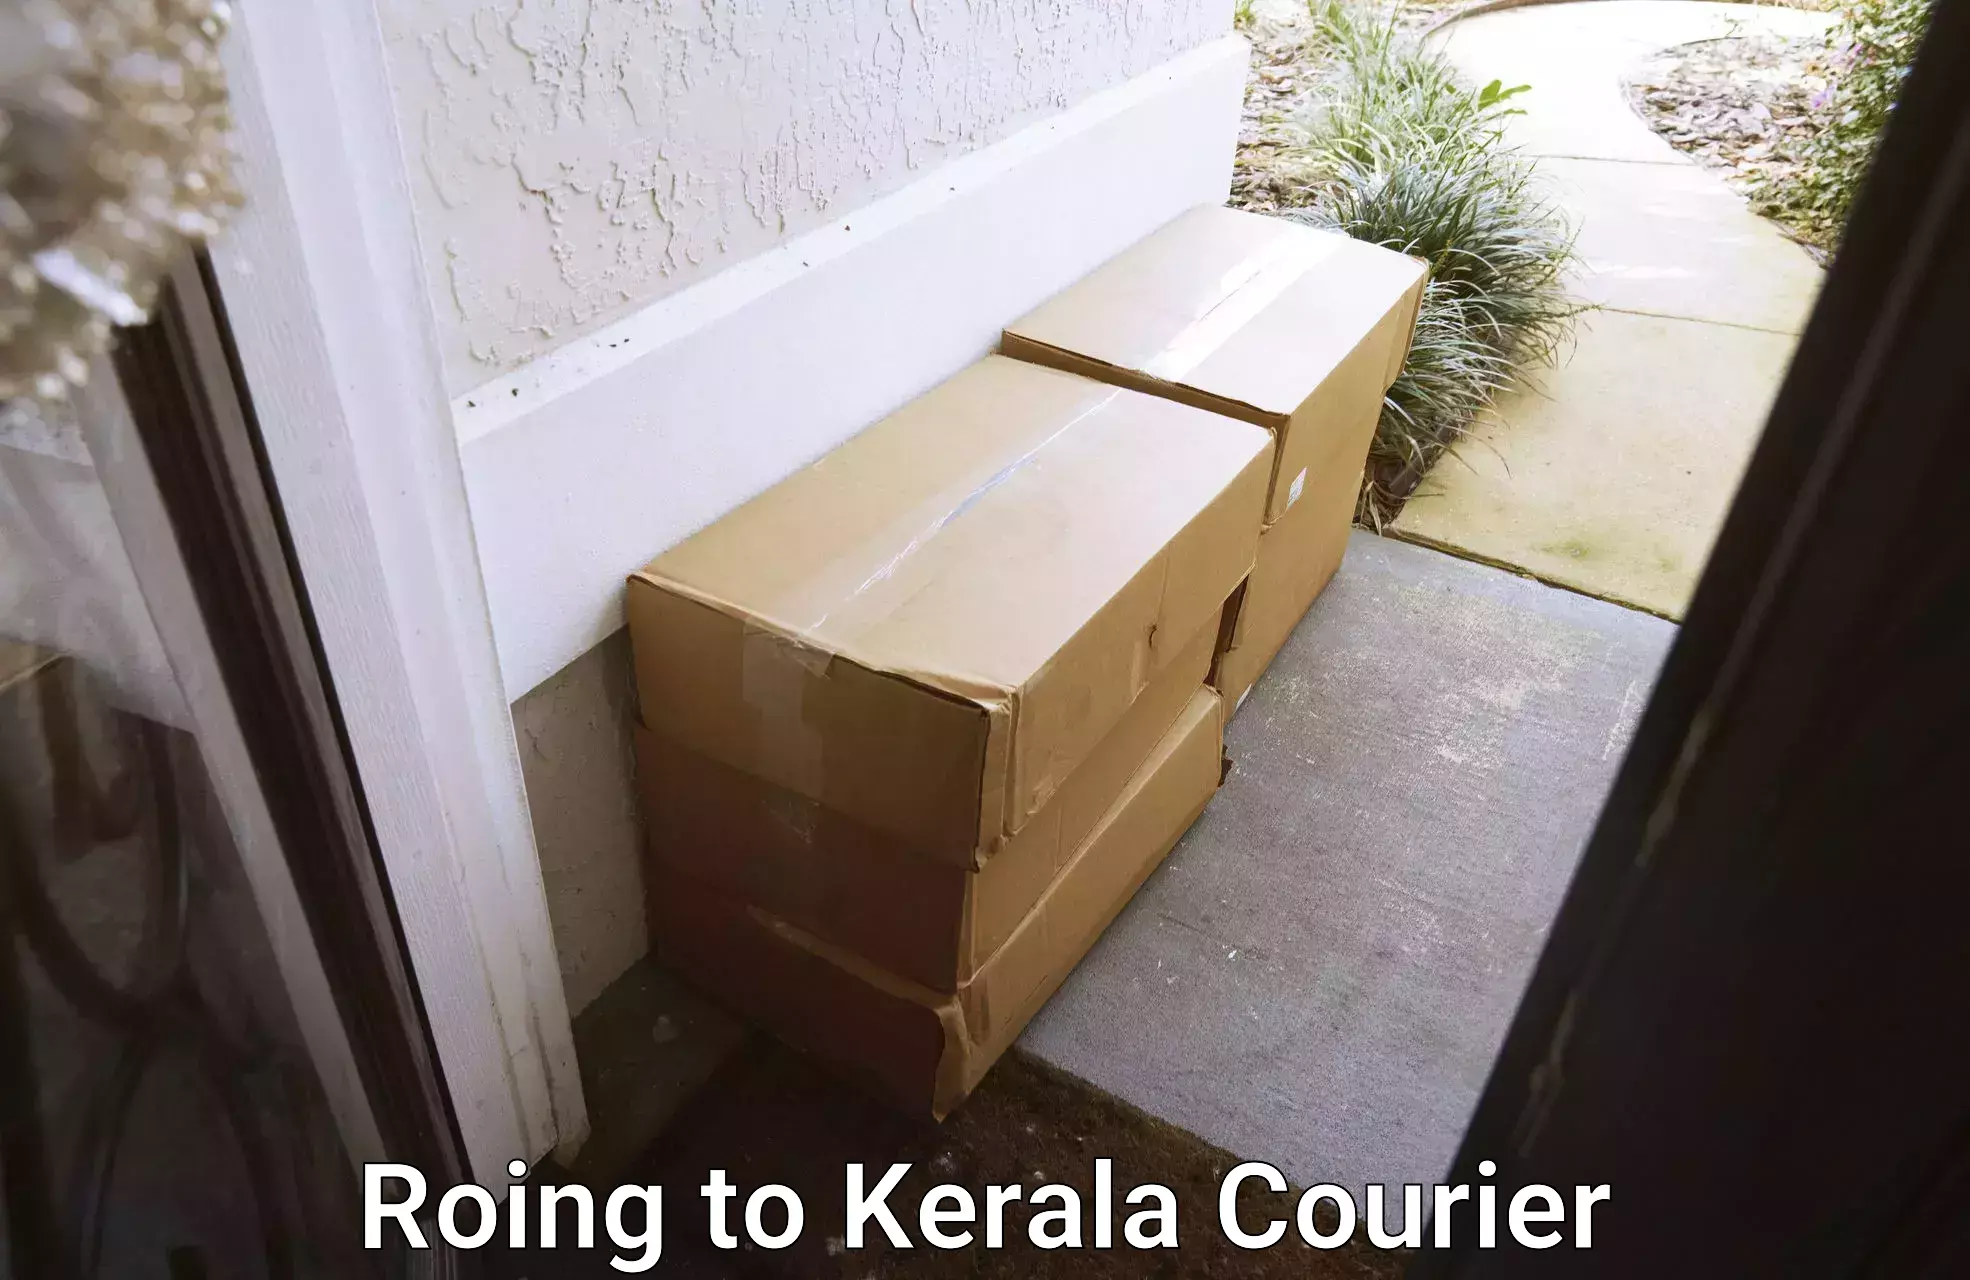 Modern courier technology Roing to Kerala